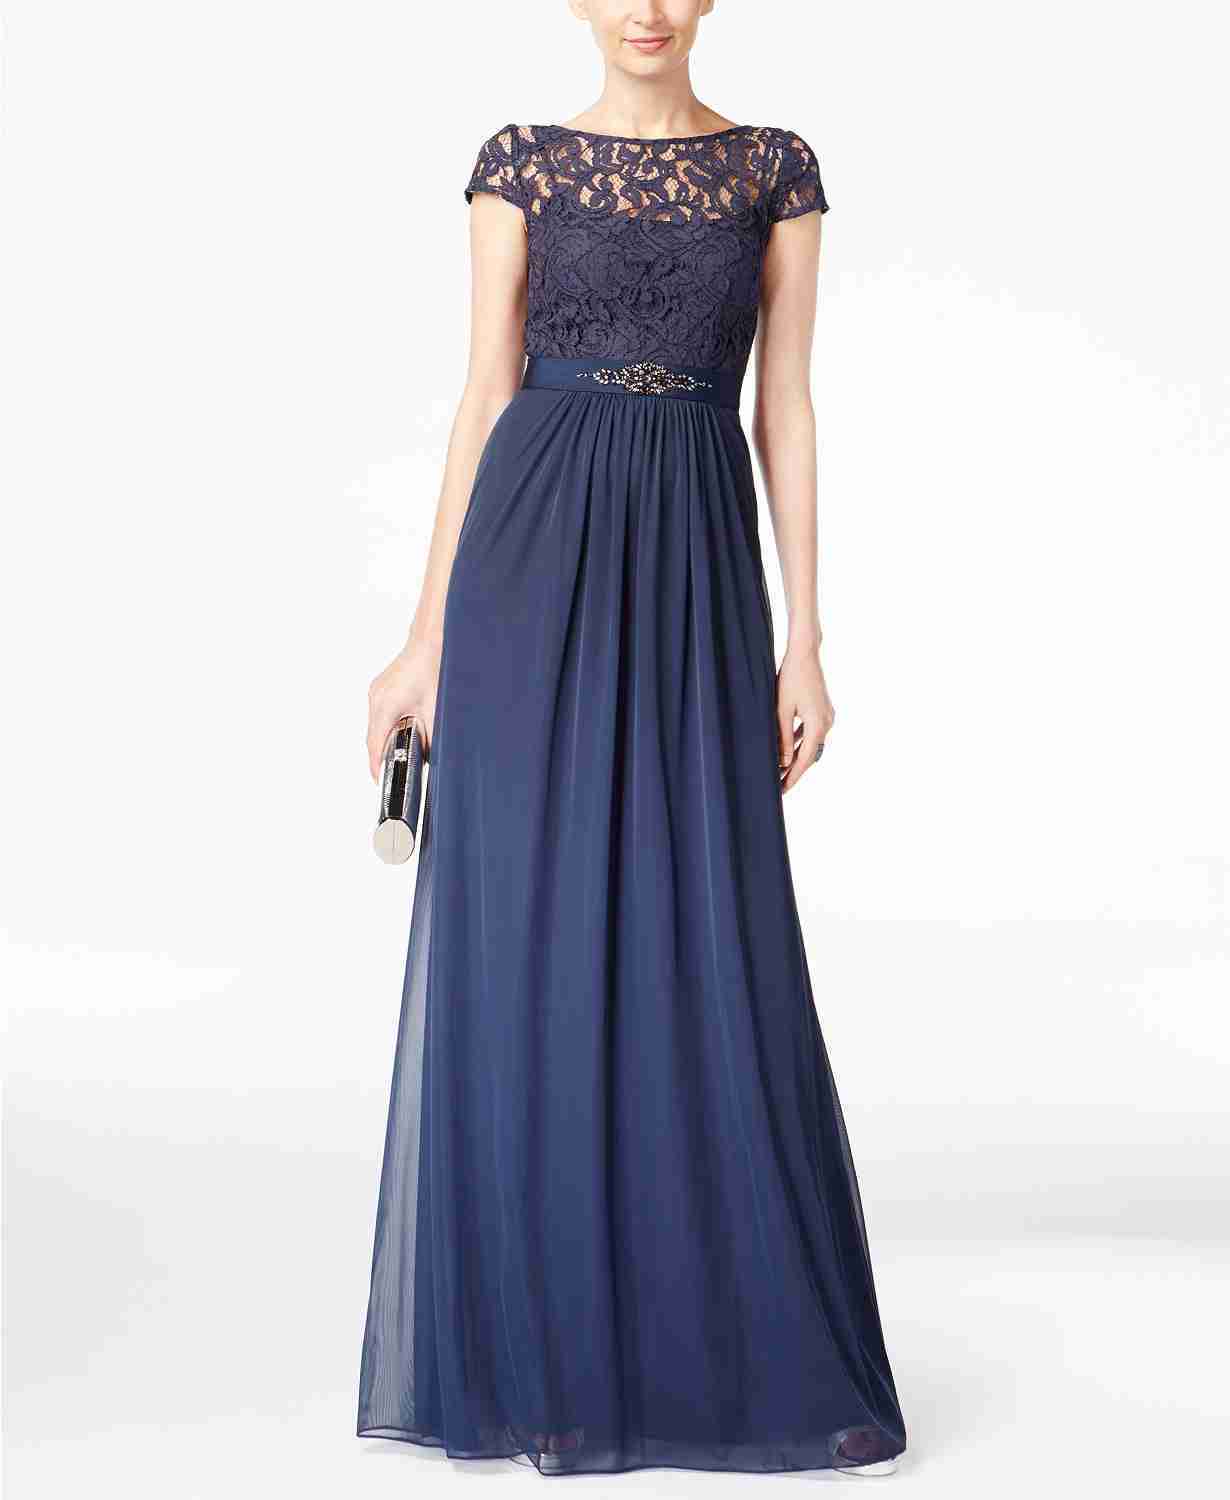 Adrianna Papell midnight blue formal gown with illusion lace and elegant accents.